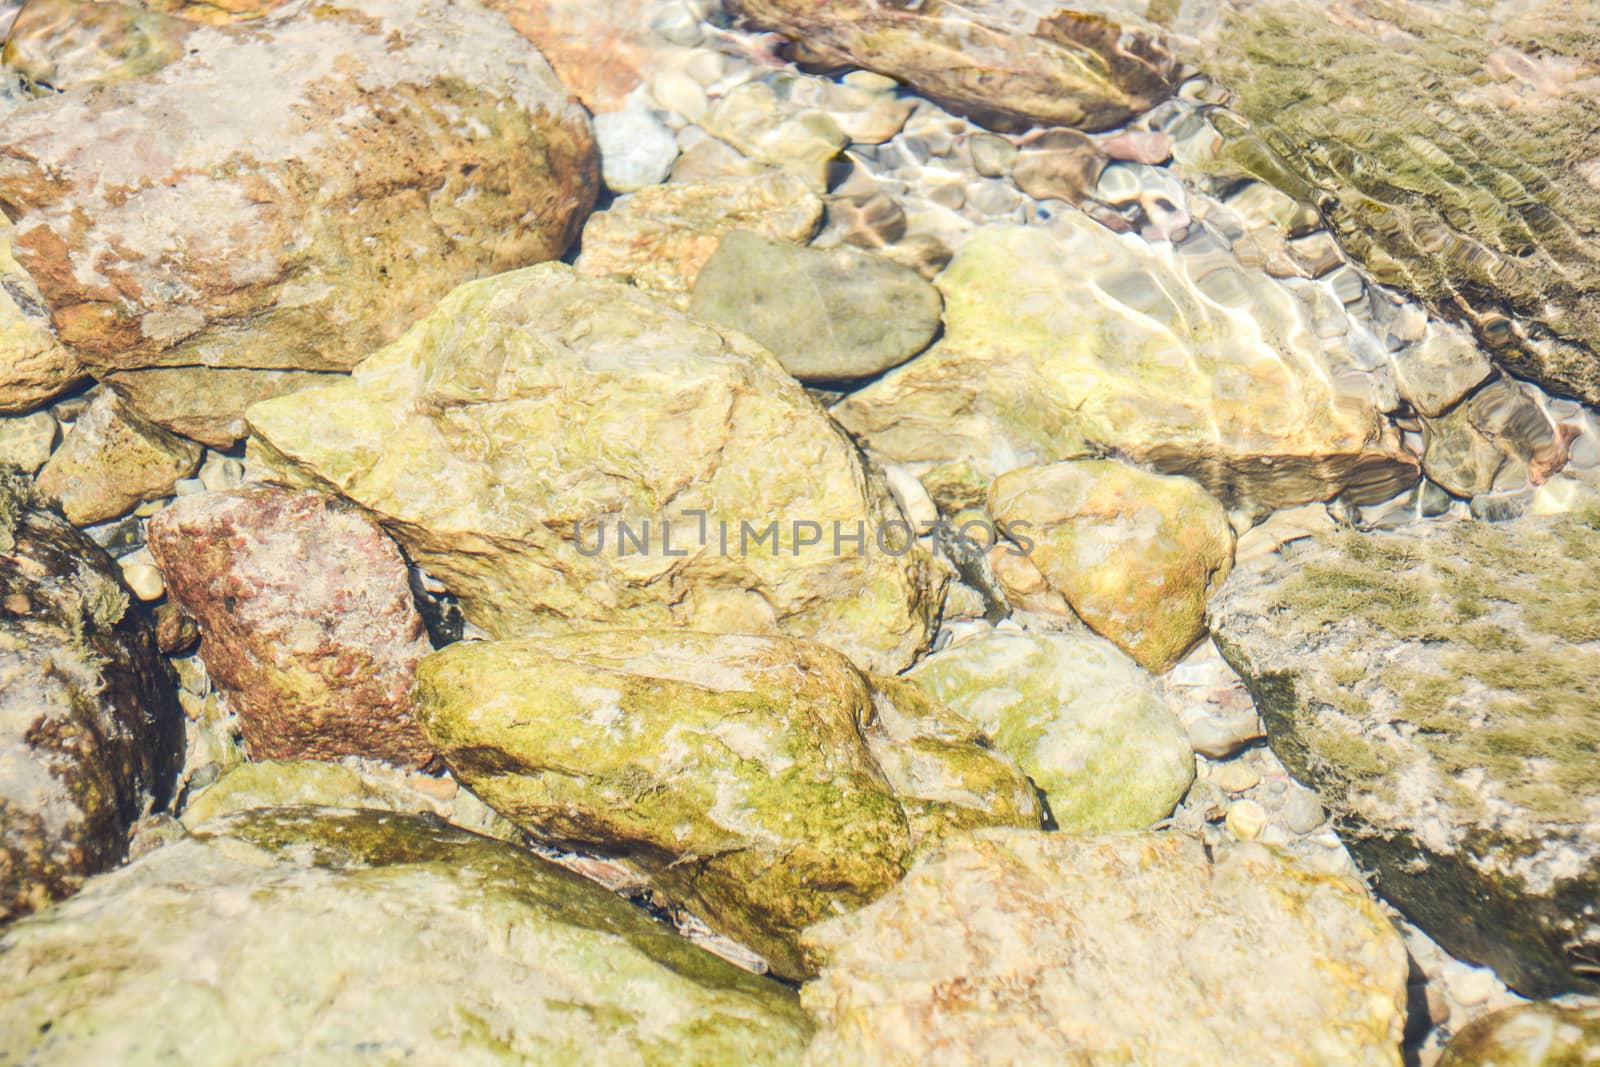 river and stones as nature background